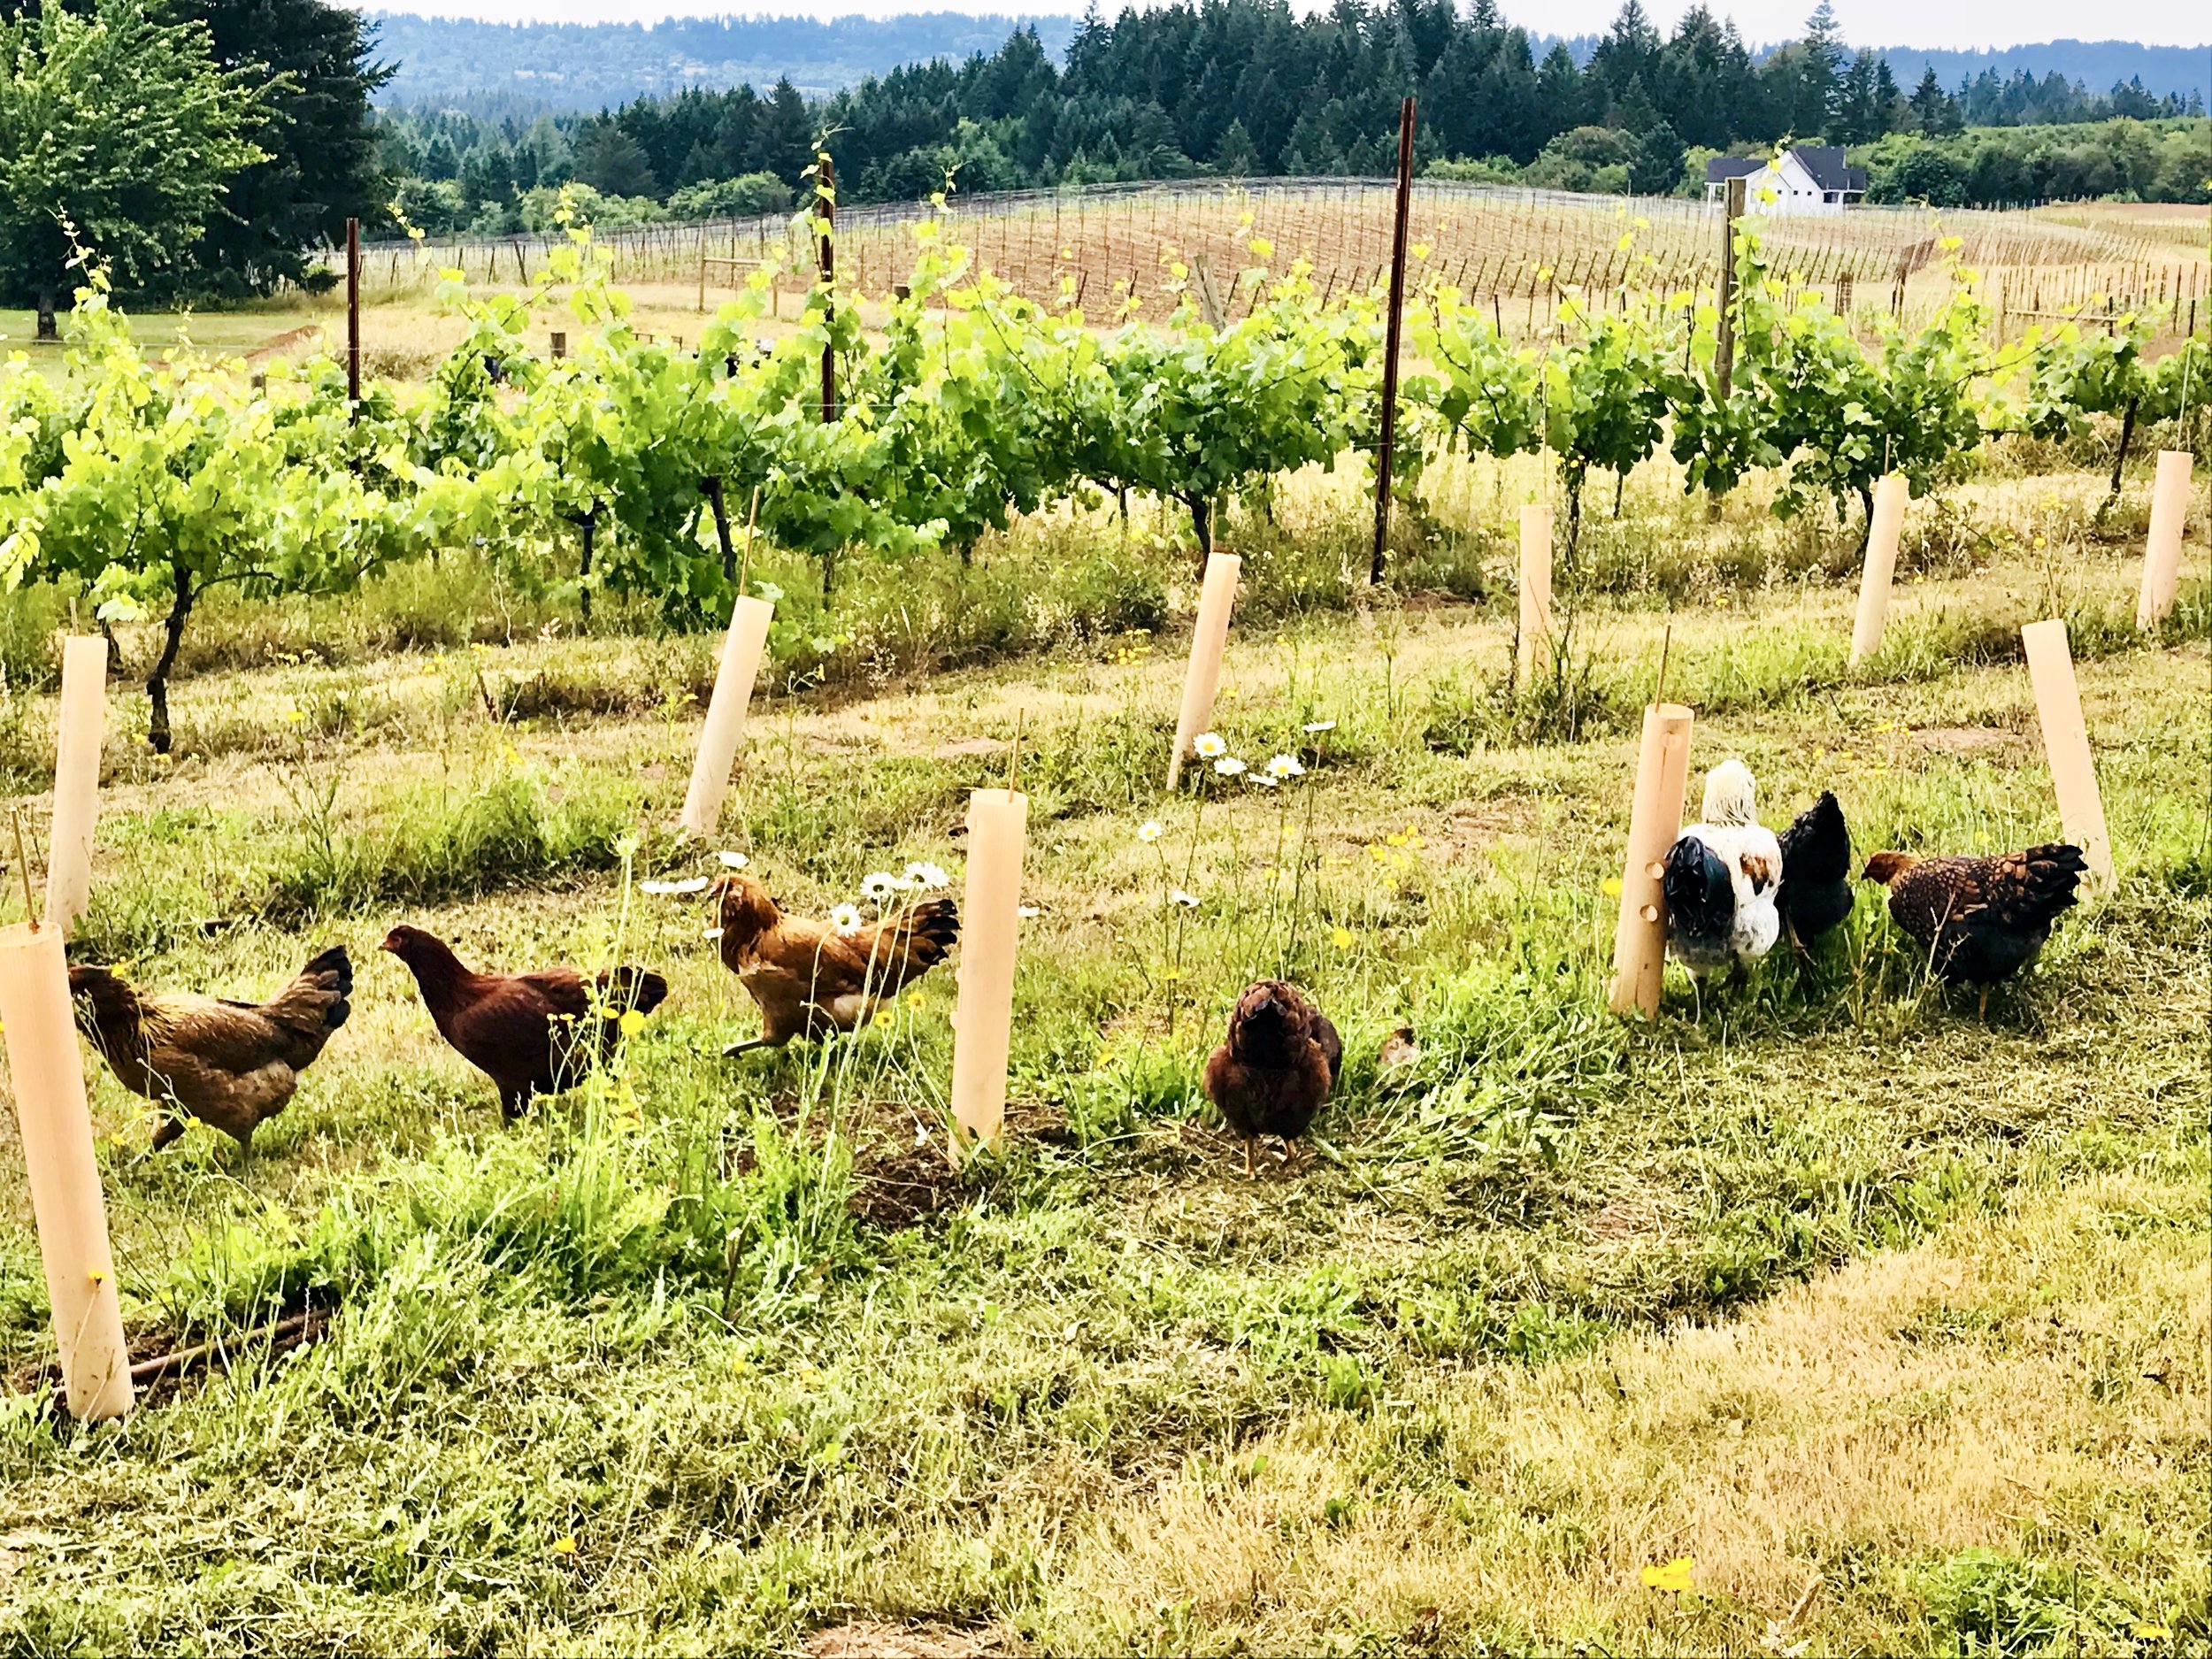  “Free range chickens” out fertilizing the grapes. 